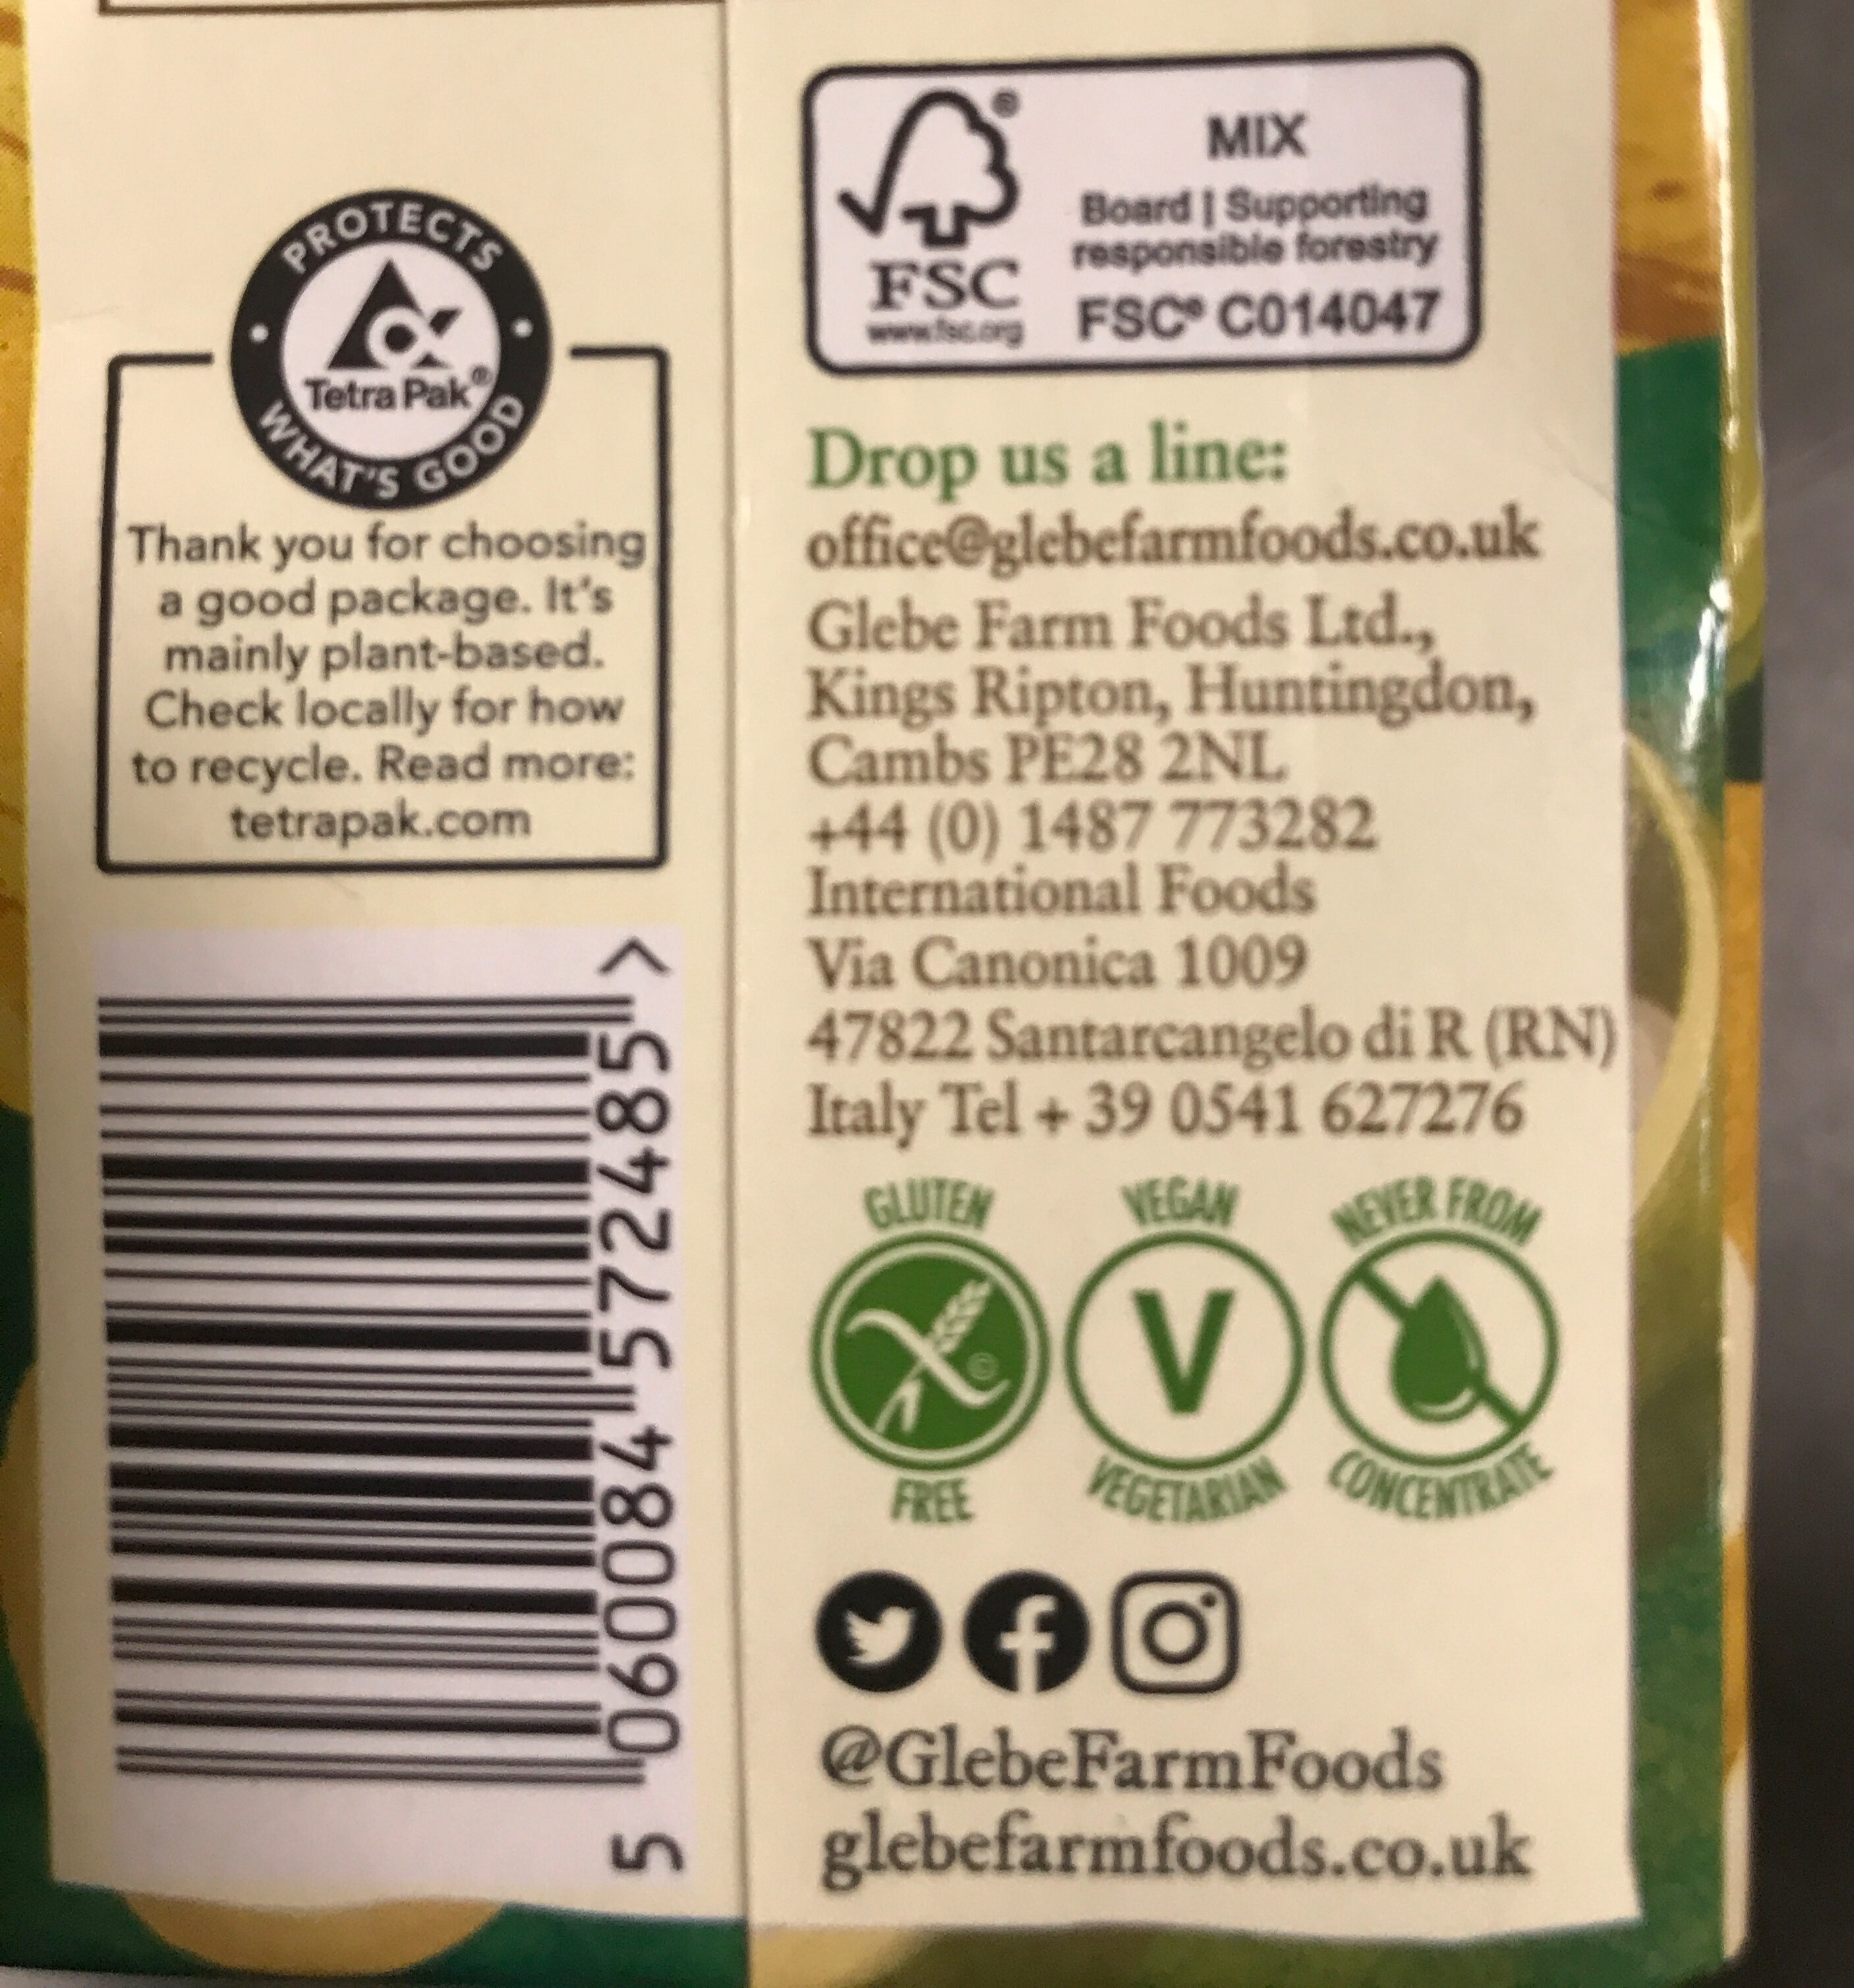 Soya milk - Recycling instructions and/or packaging information